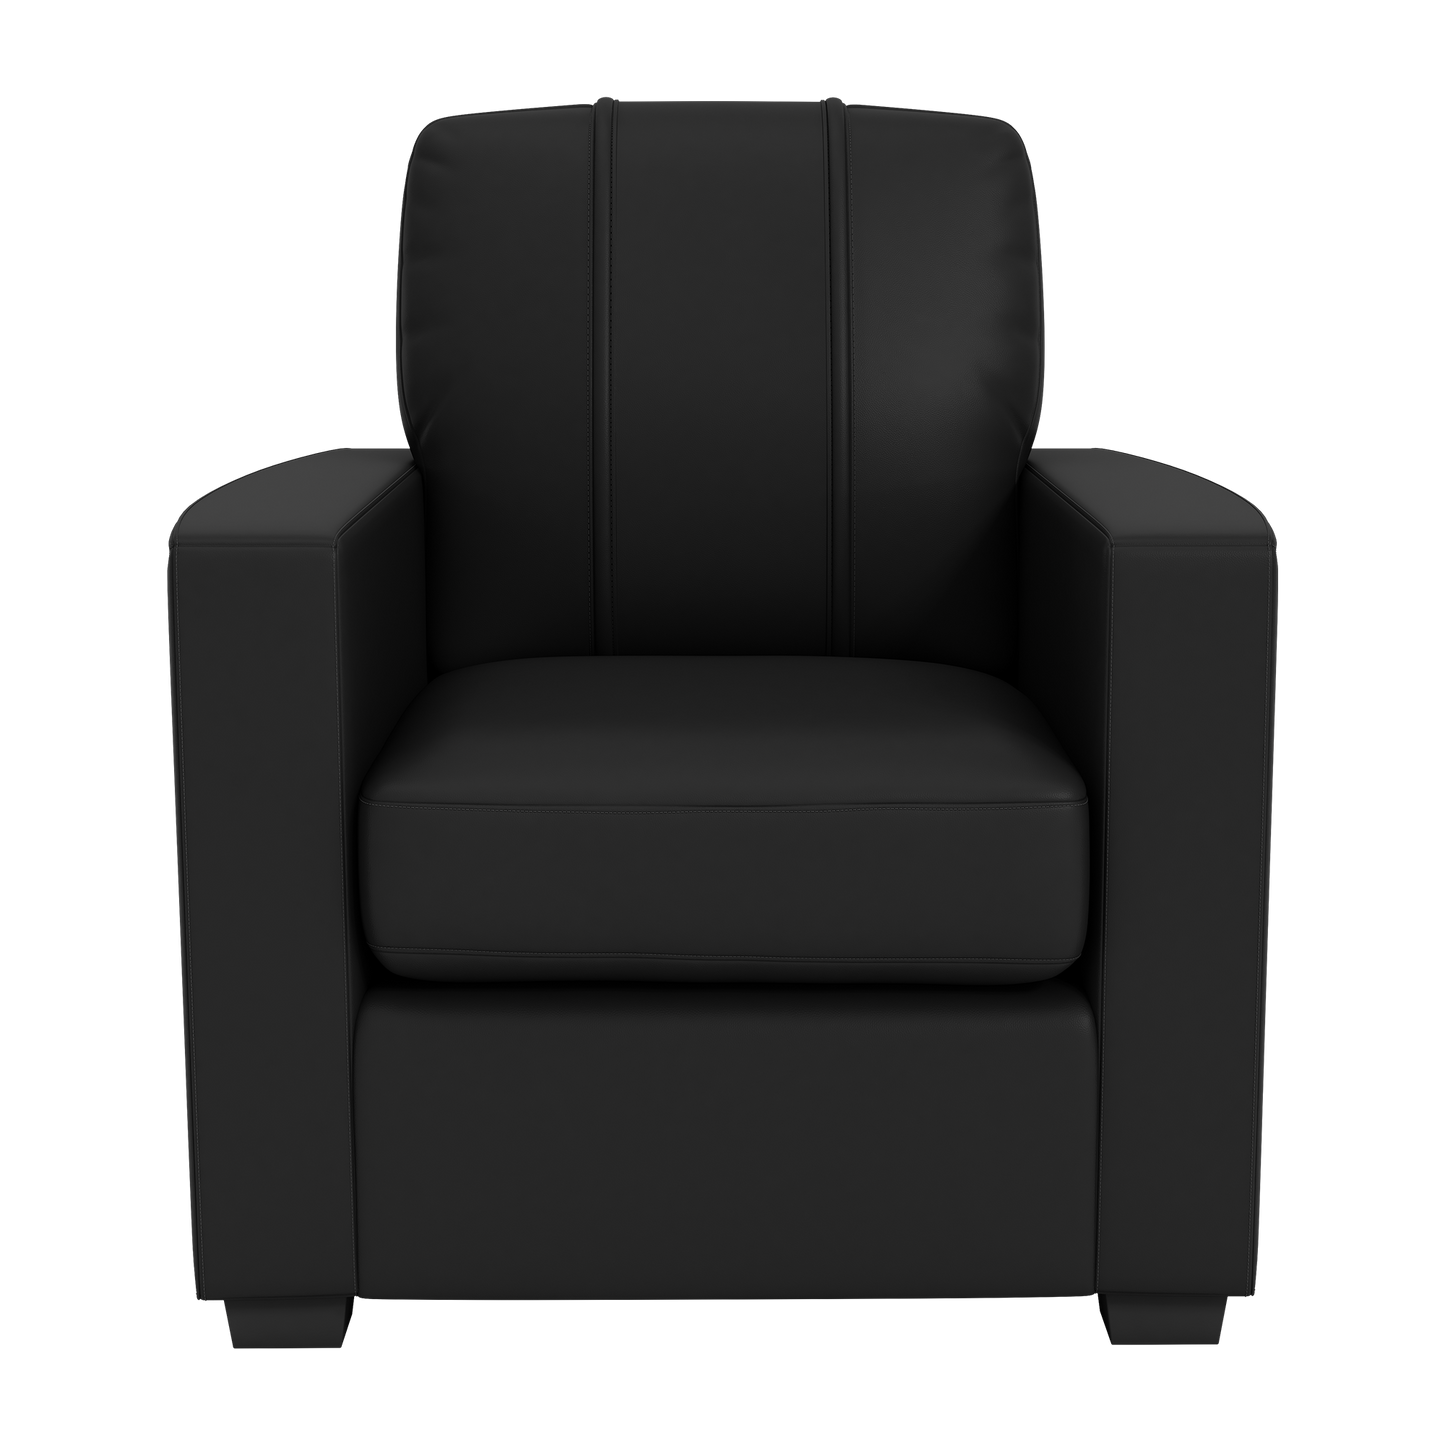 Silver Club Chair with Los Angeles Lakers Logo